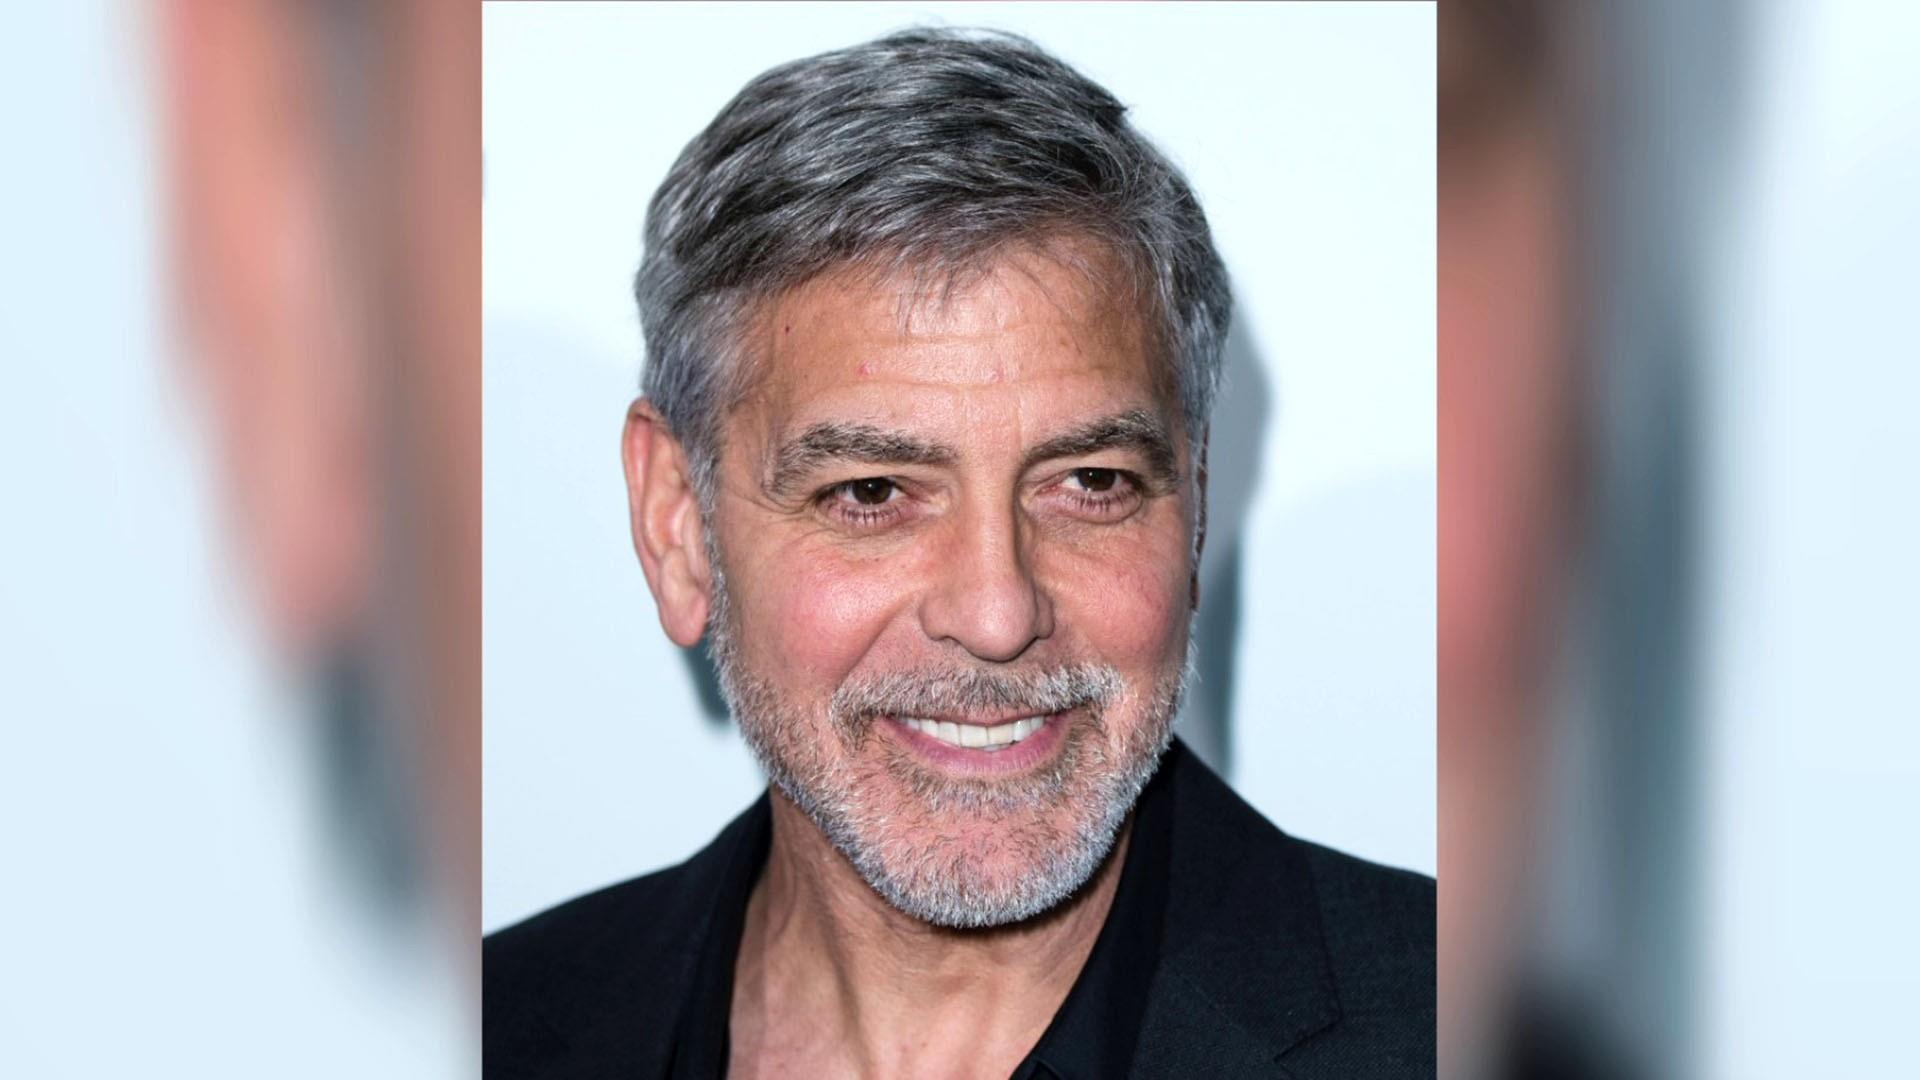 George Clooney's secret to his movie star hair? A Flowbee